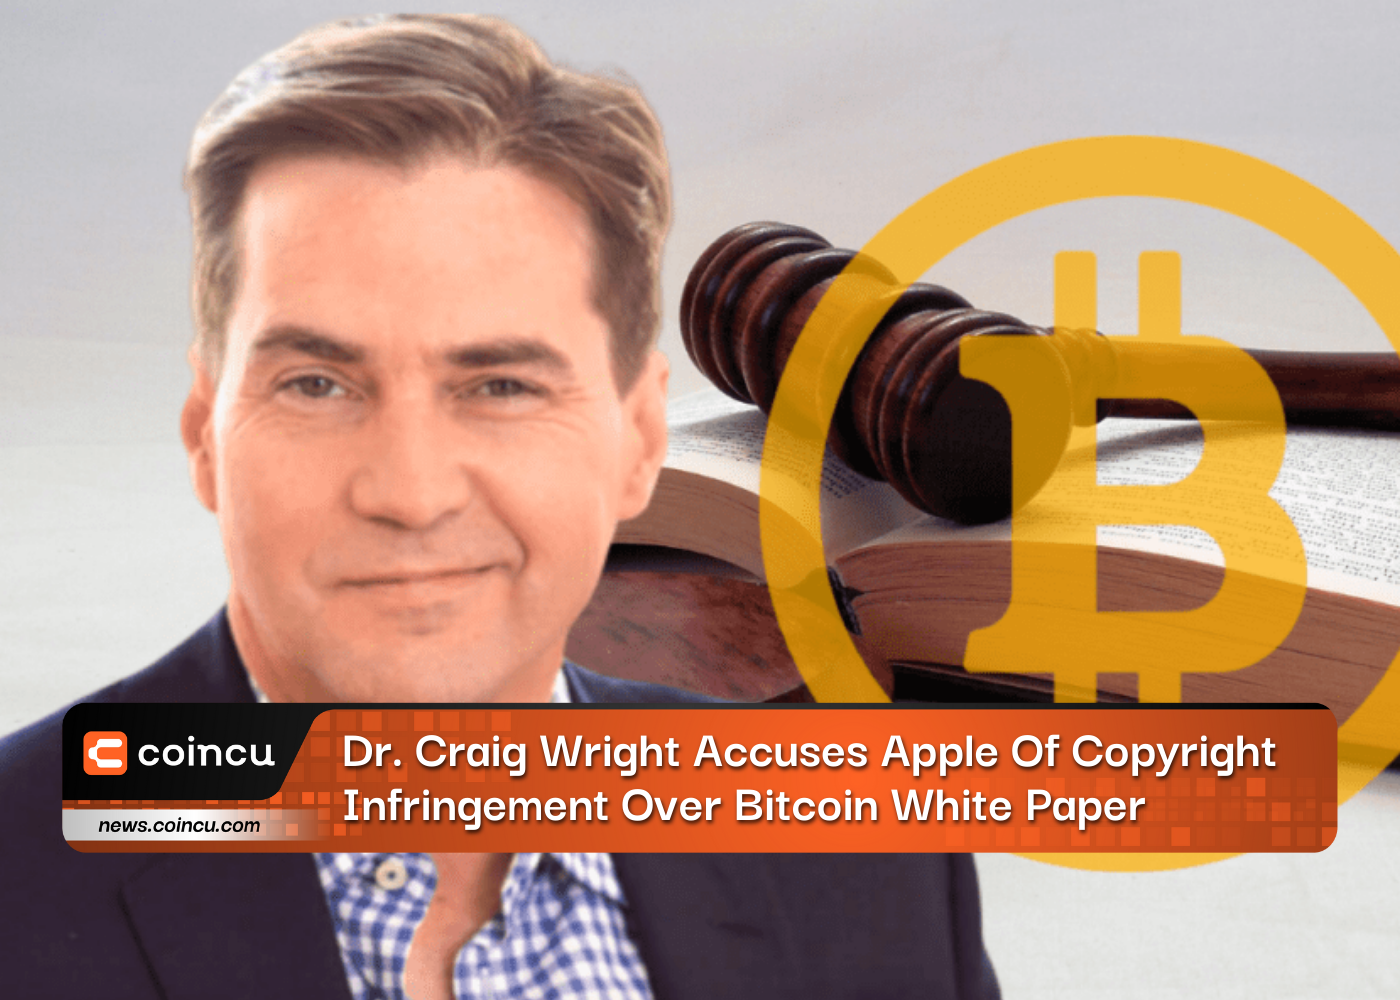 Dr. Craig Wright Accuses Apple Of Copyright Infringement Over Bitcoin White Paper